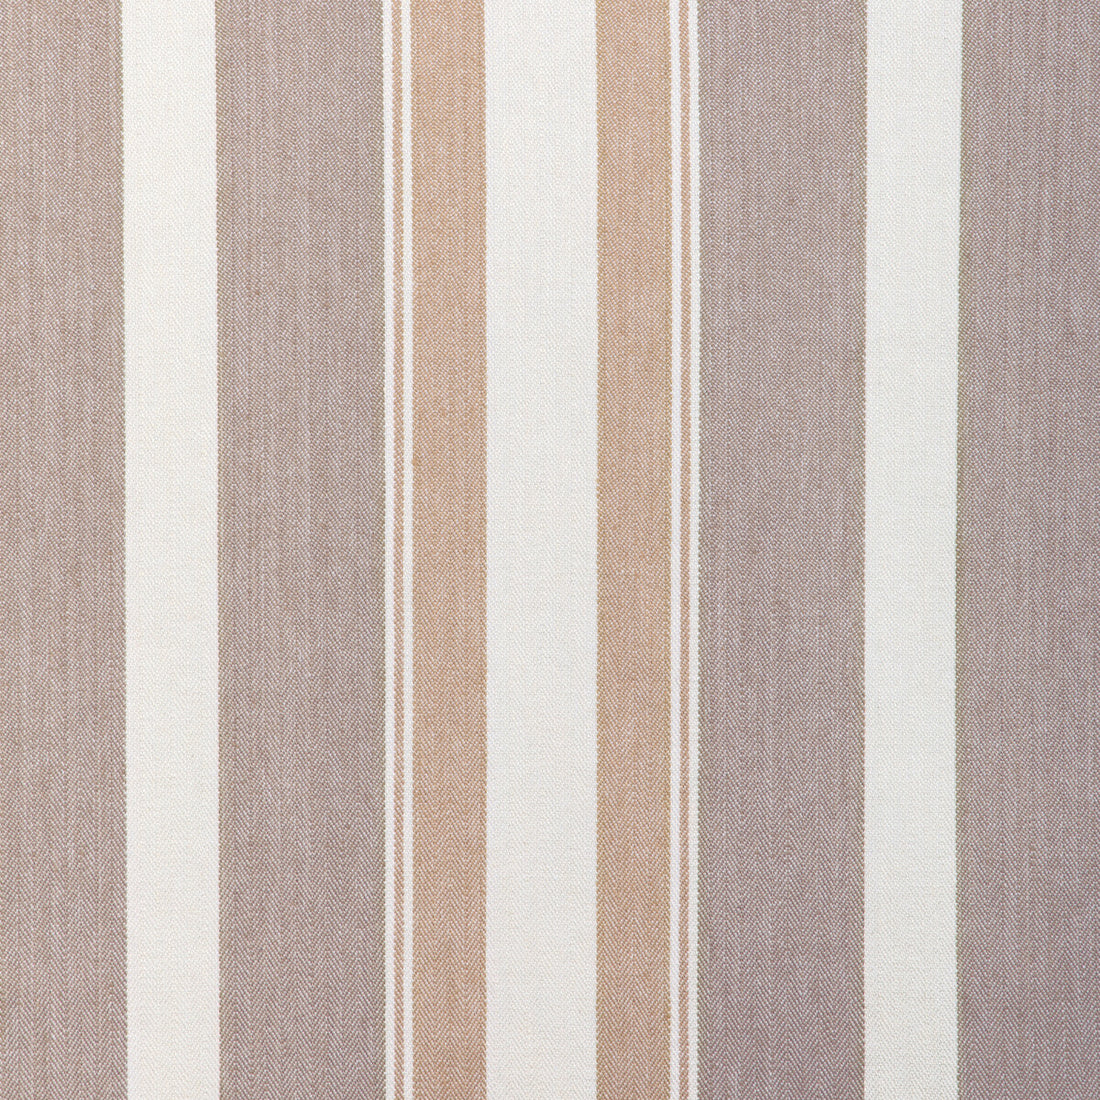 Natural Stripe fabric in wheat color - pattern 36863.16.0 - by Kravet Couture in the Atelier Weaves collection